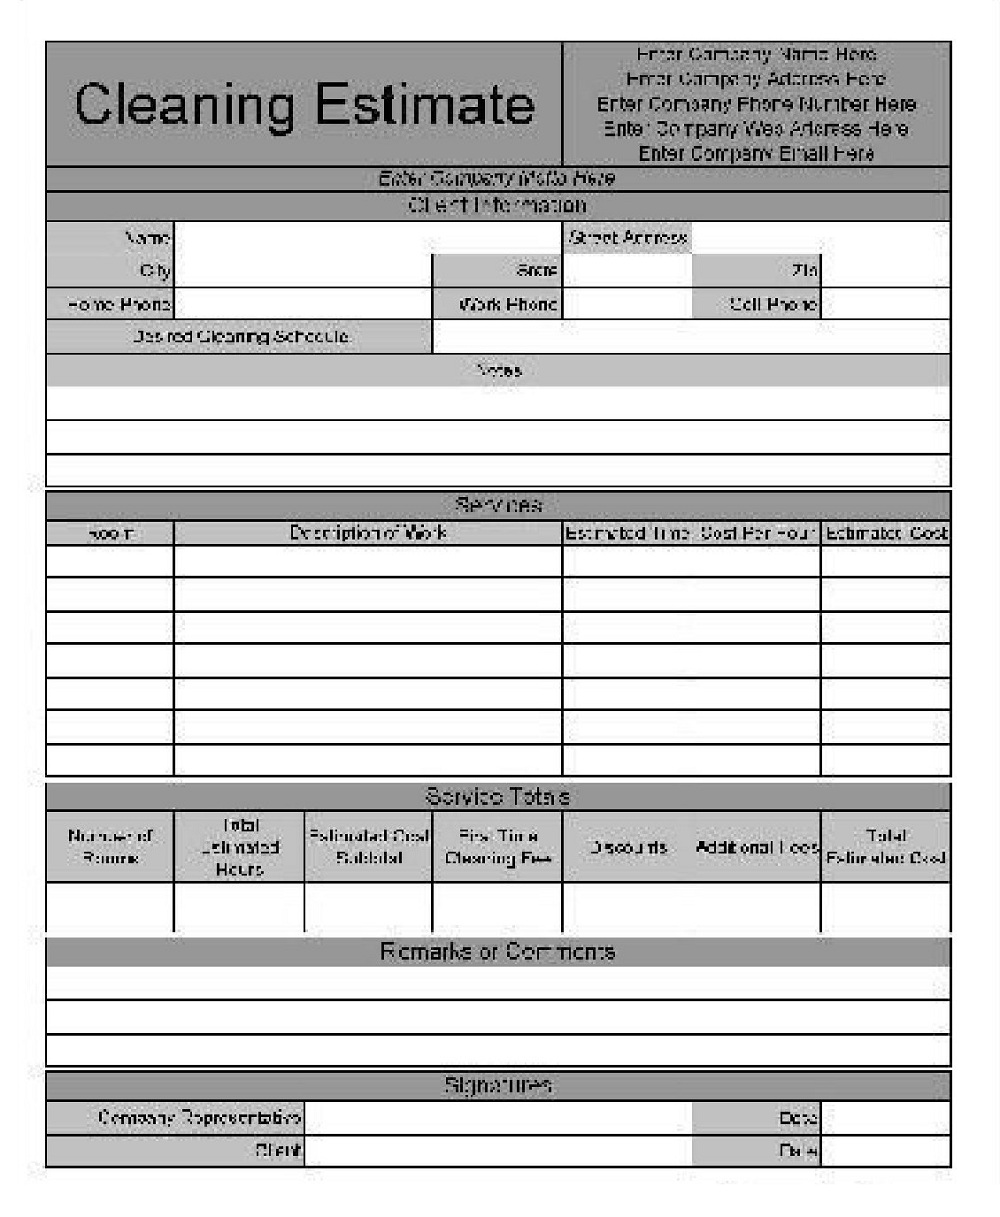 Cleaning Estimate Form Template